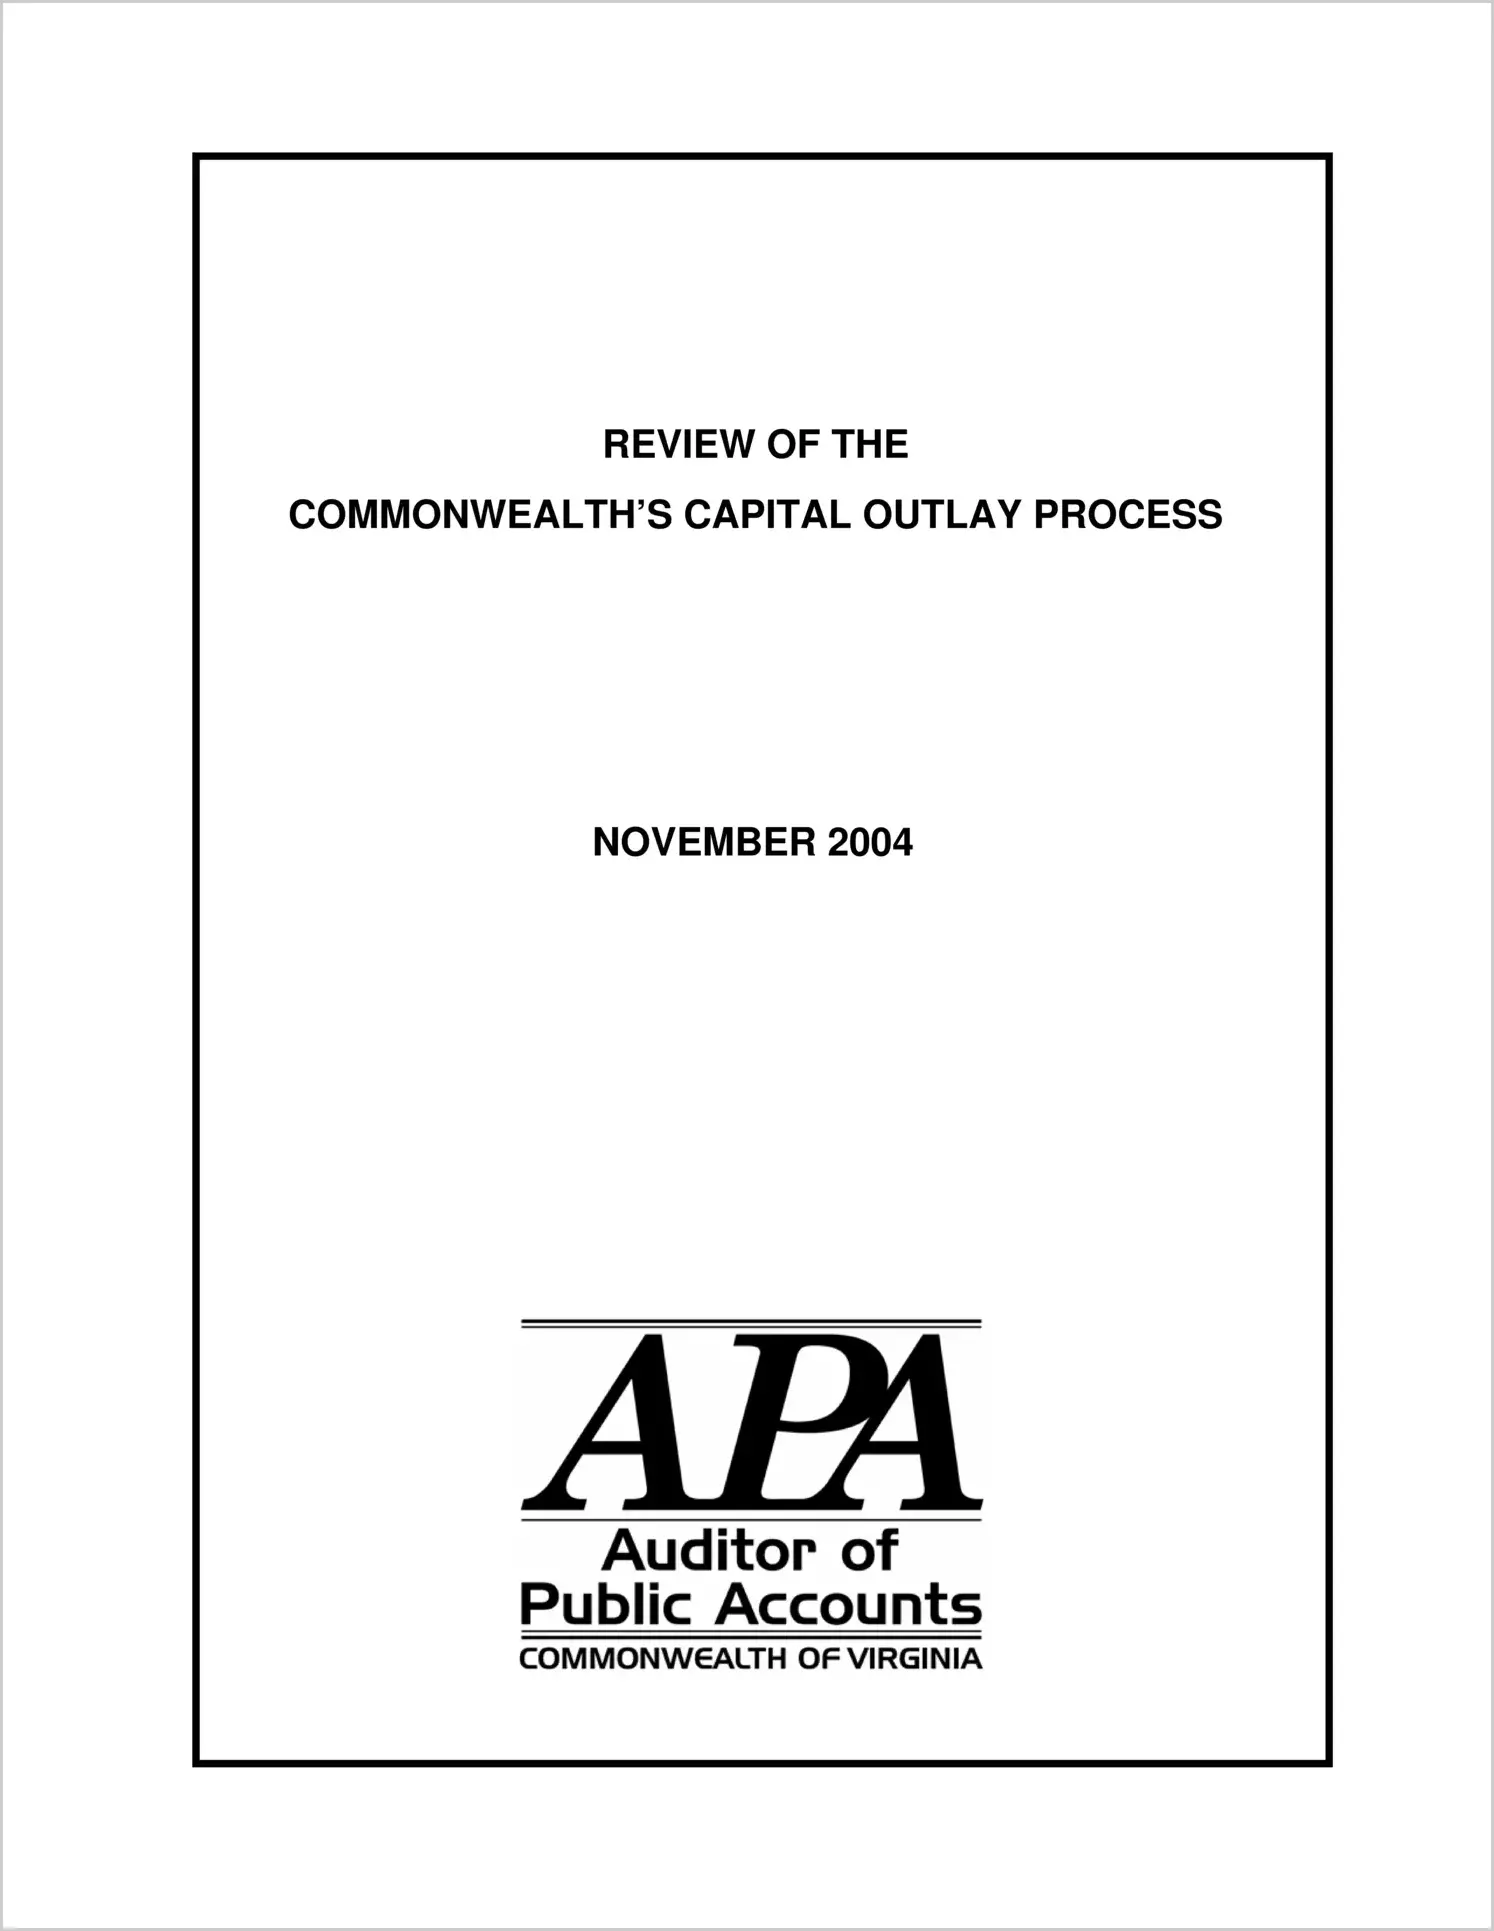 Special ReportCommonwealth? Capital Outlay Process (Report Date: November 2004)